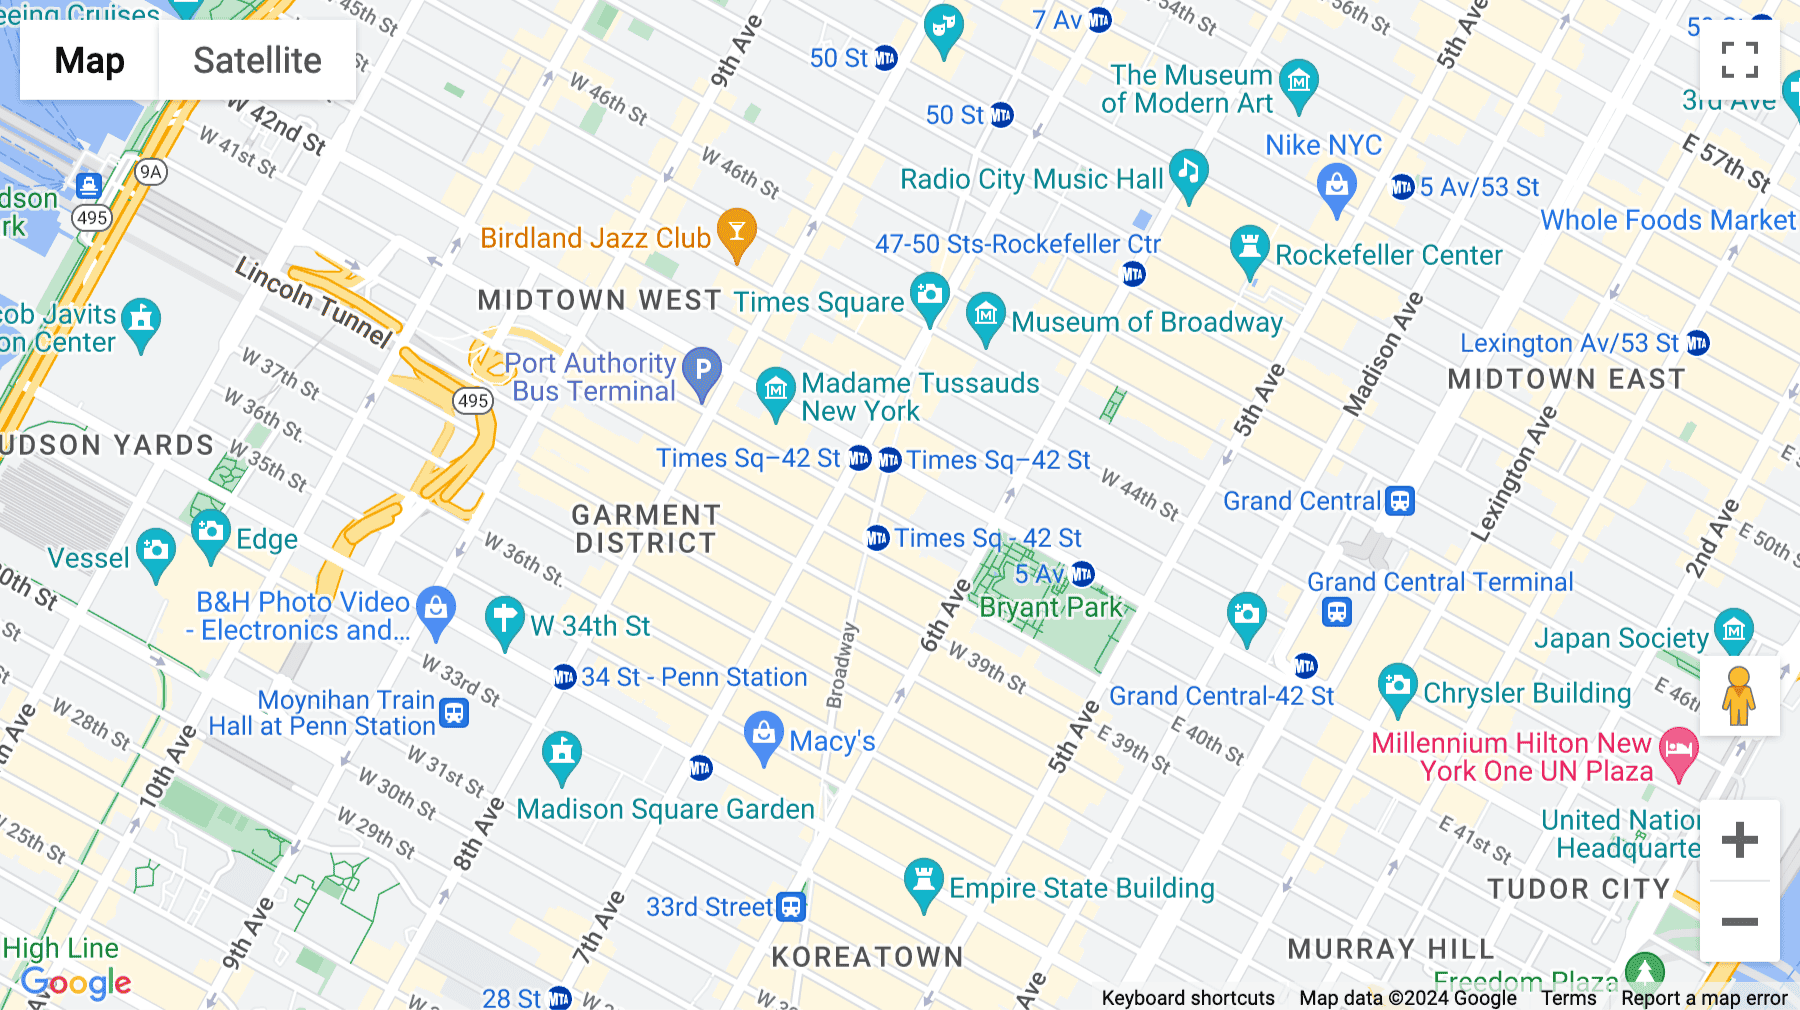 Click for interative map of 1460 Broadway, Times Square, New York